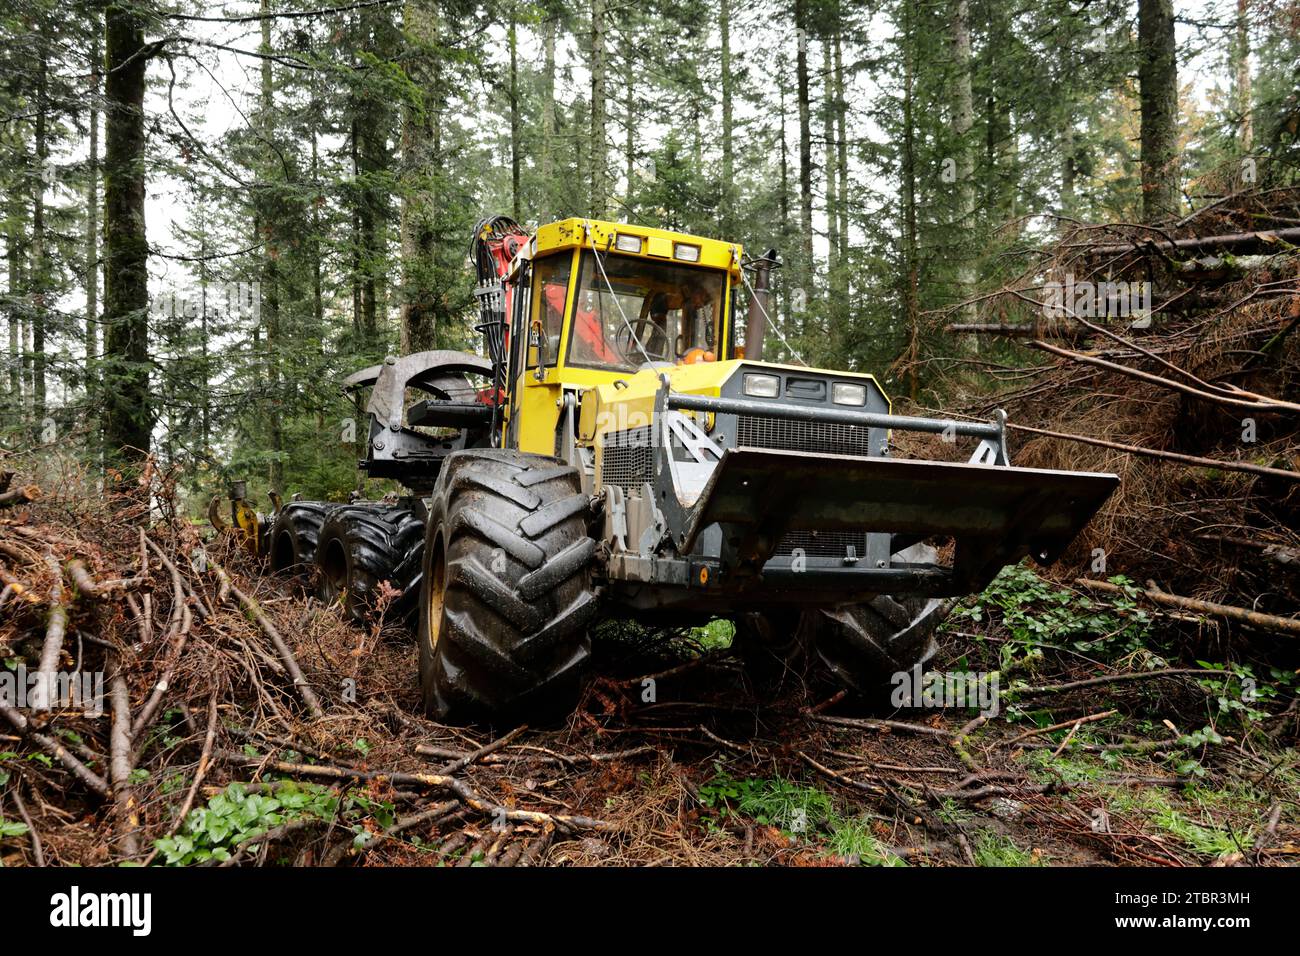 Machine for processing wood is in the forest Stock Photo